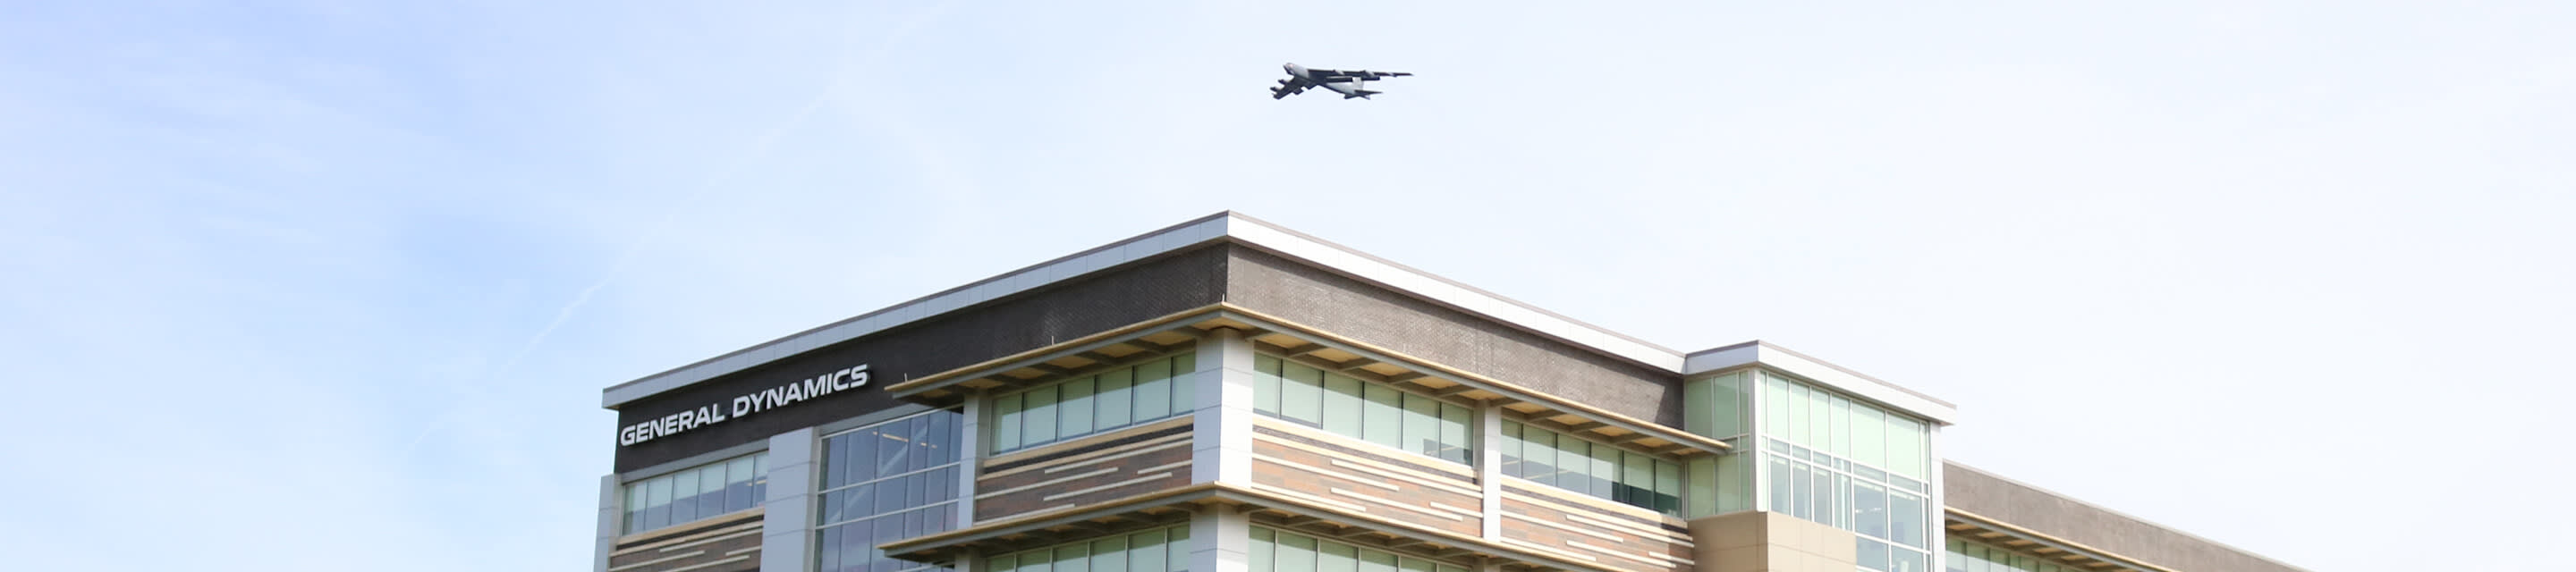 Military plane flying over GDIT building